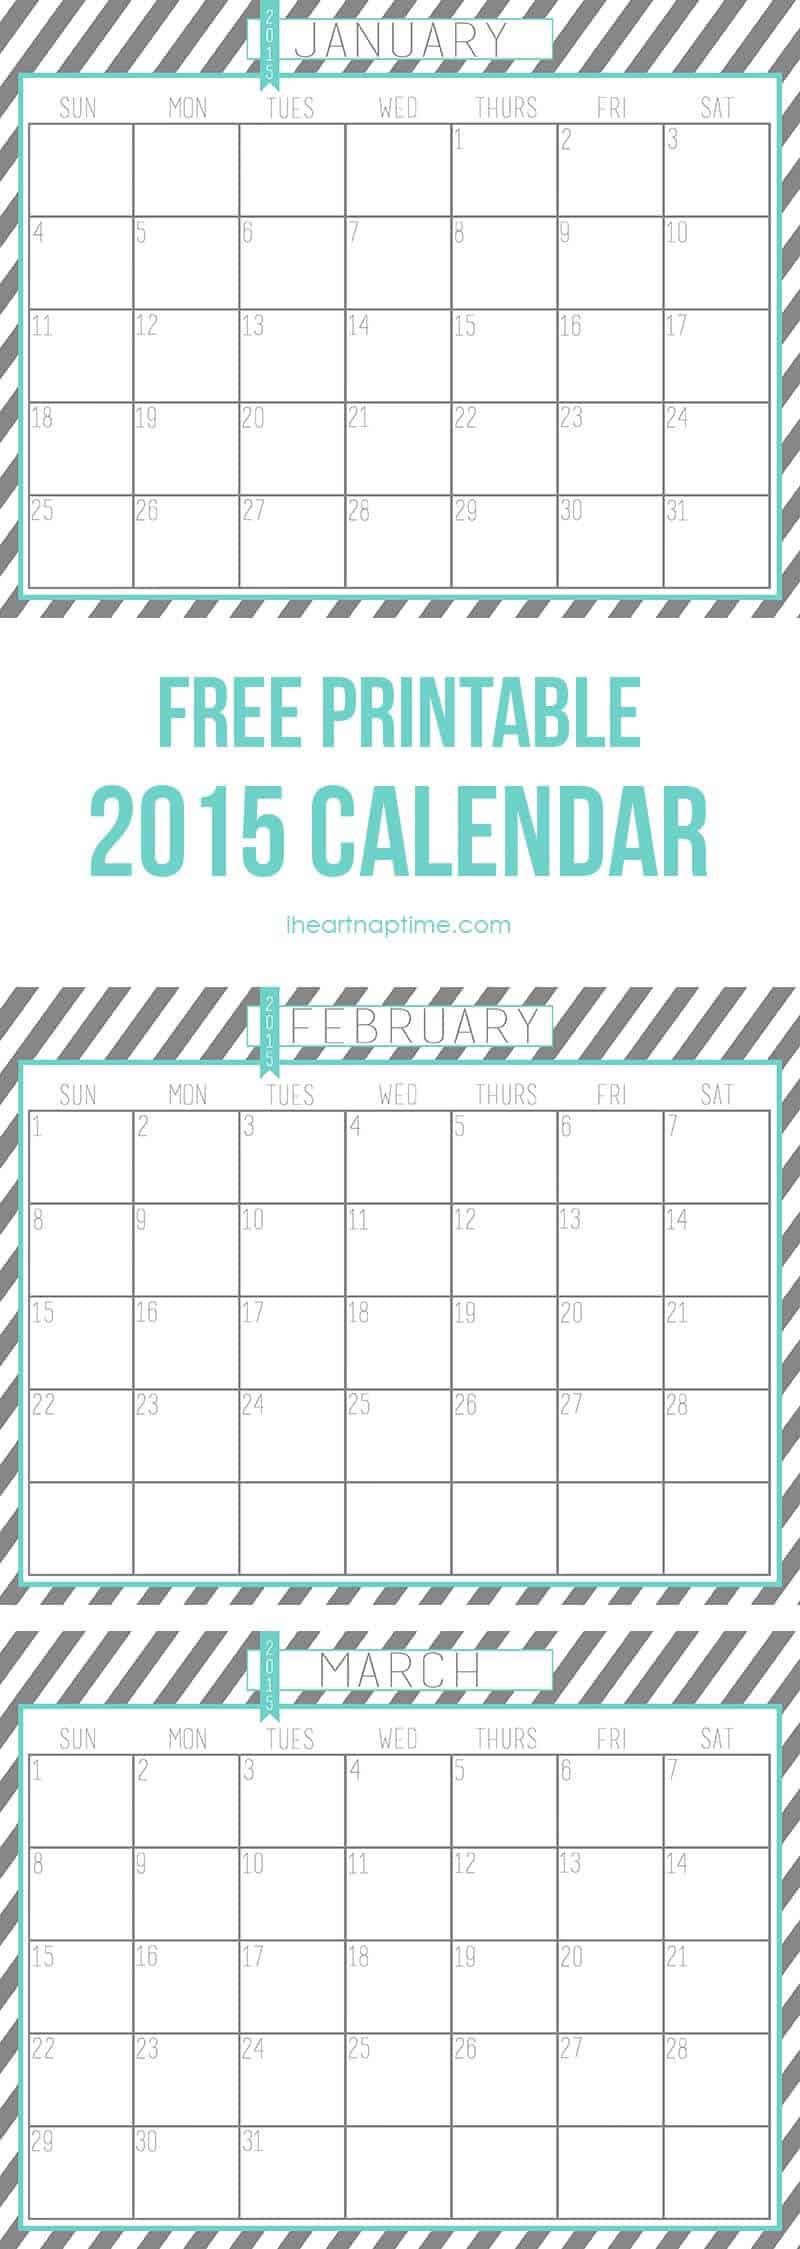 http://www.iheartnaptime.net/wp-content/uploads/2014/11/Free-printable-2015-calendar-pages.jpg